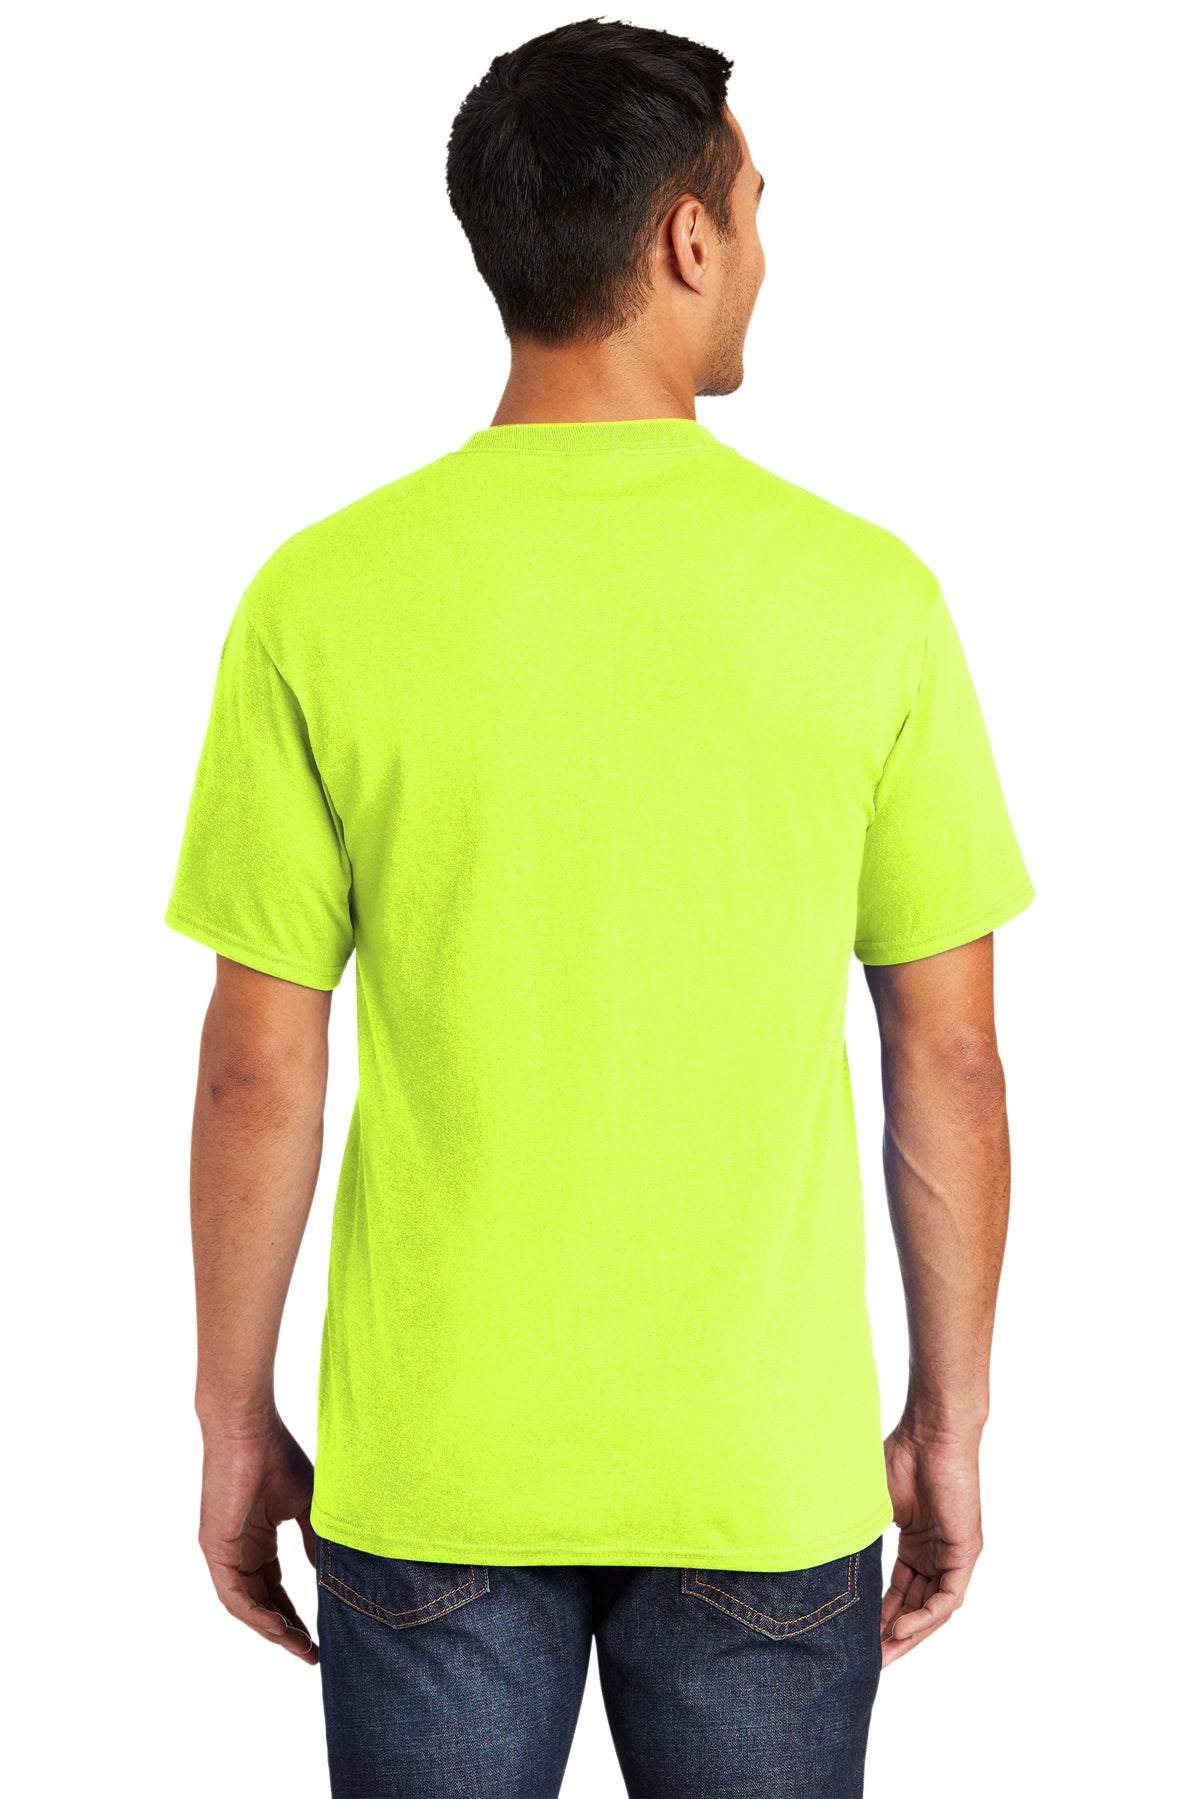 Port & Company Tall Core Blend Customized Tee's, Safety Green